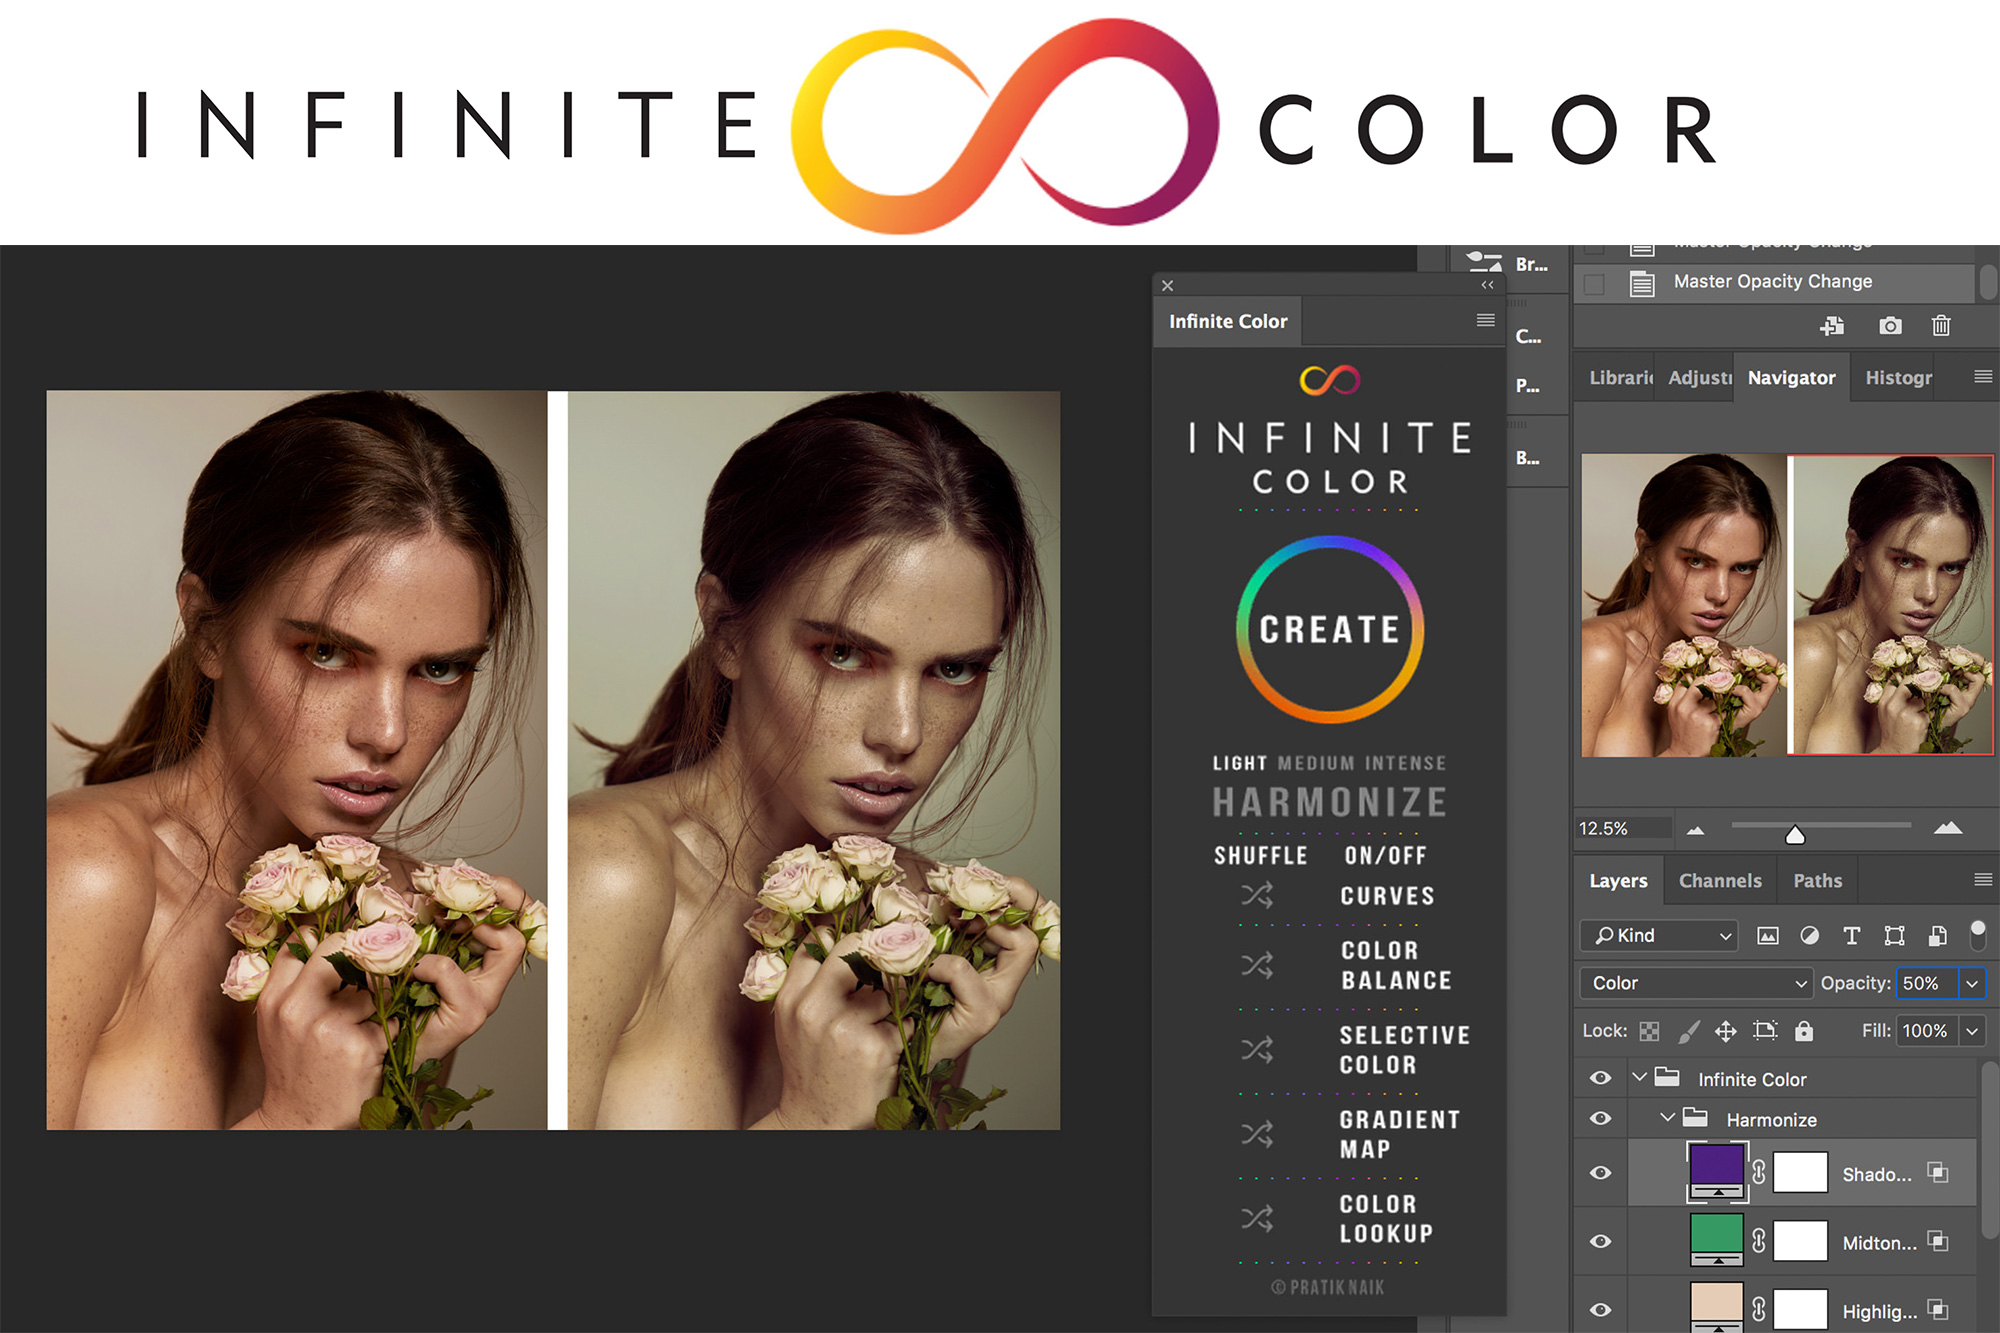 Hands On With Pratik Naik’s Infinite Color Panel | What It Does, How It Works, & Why It’s Unique